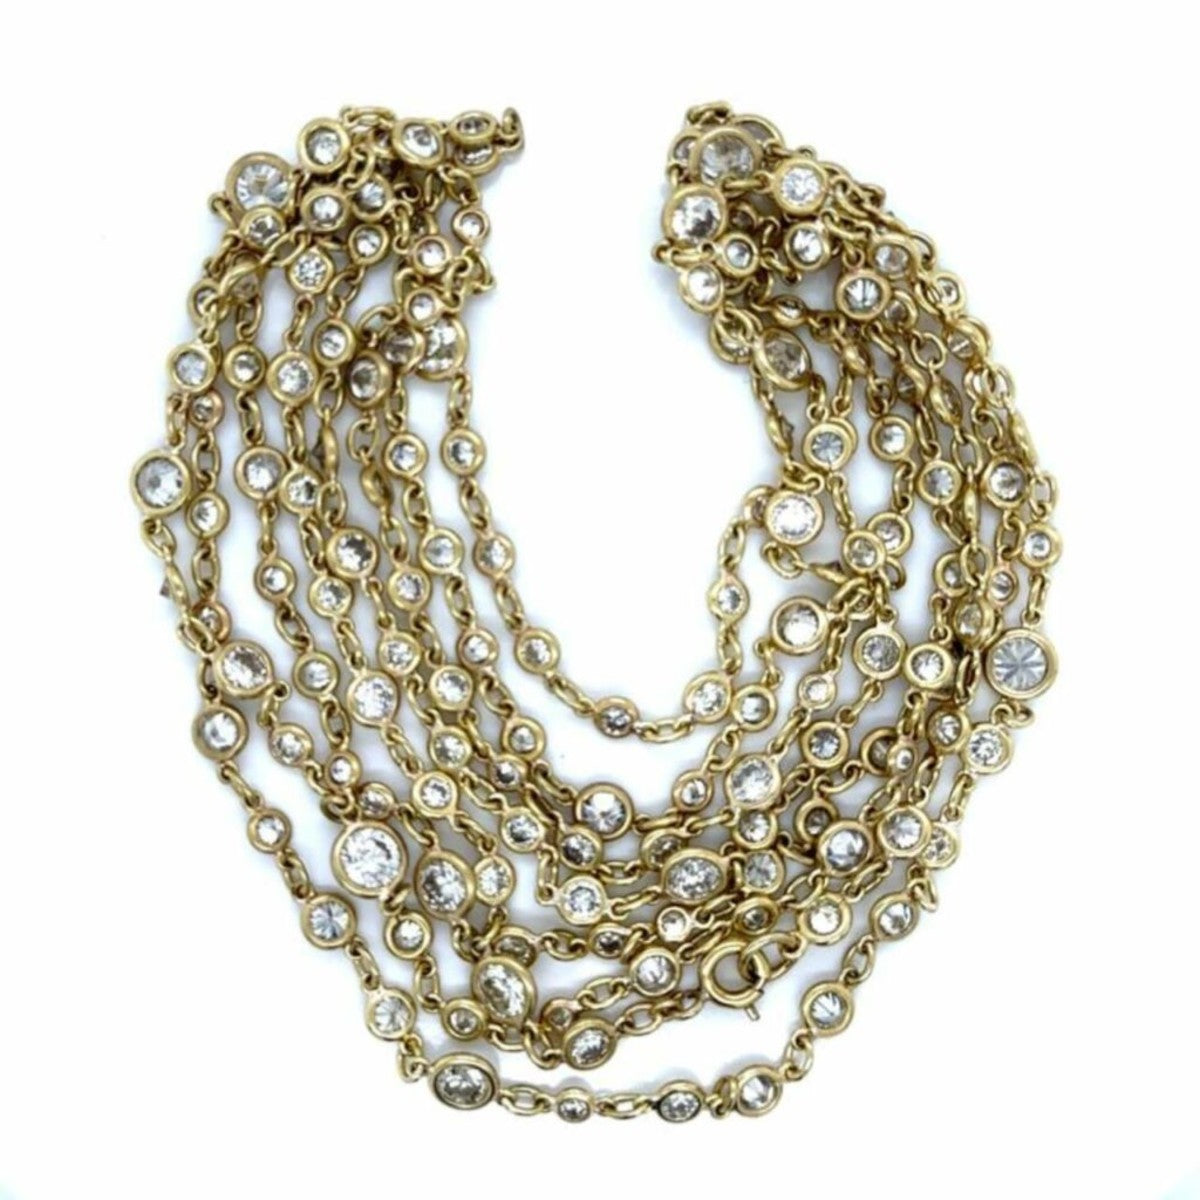 Post-1980s 18KT Yellow Gold Diamond Necklace front view